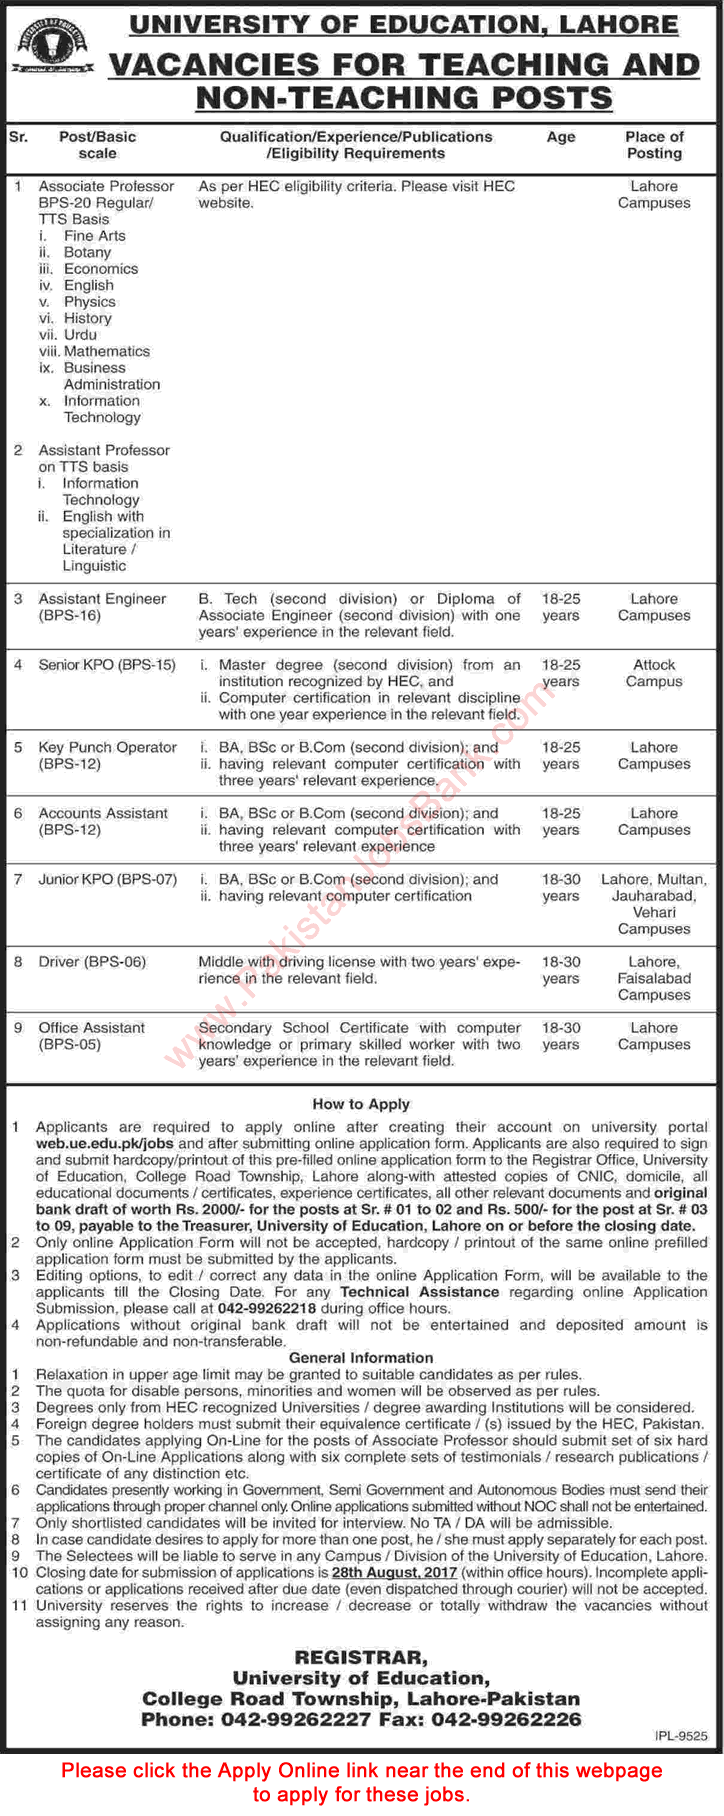 University of Education Lahore Jobs July 2017 Apply Online Teaching Faculty & Others Latest